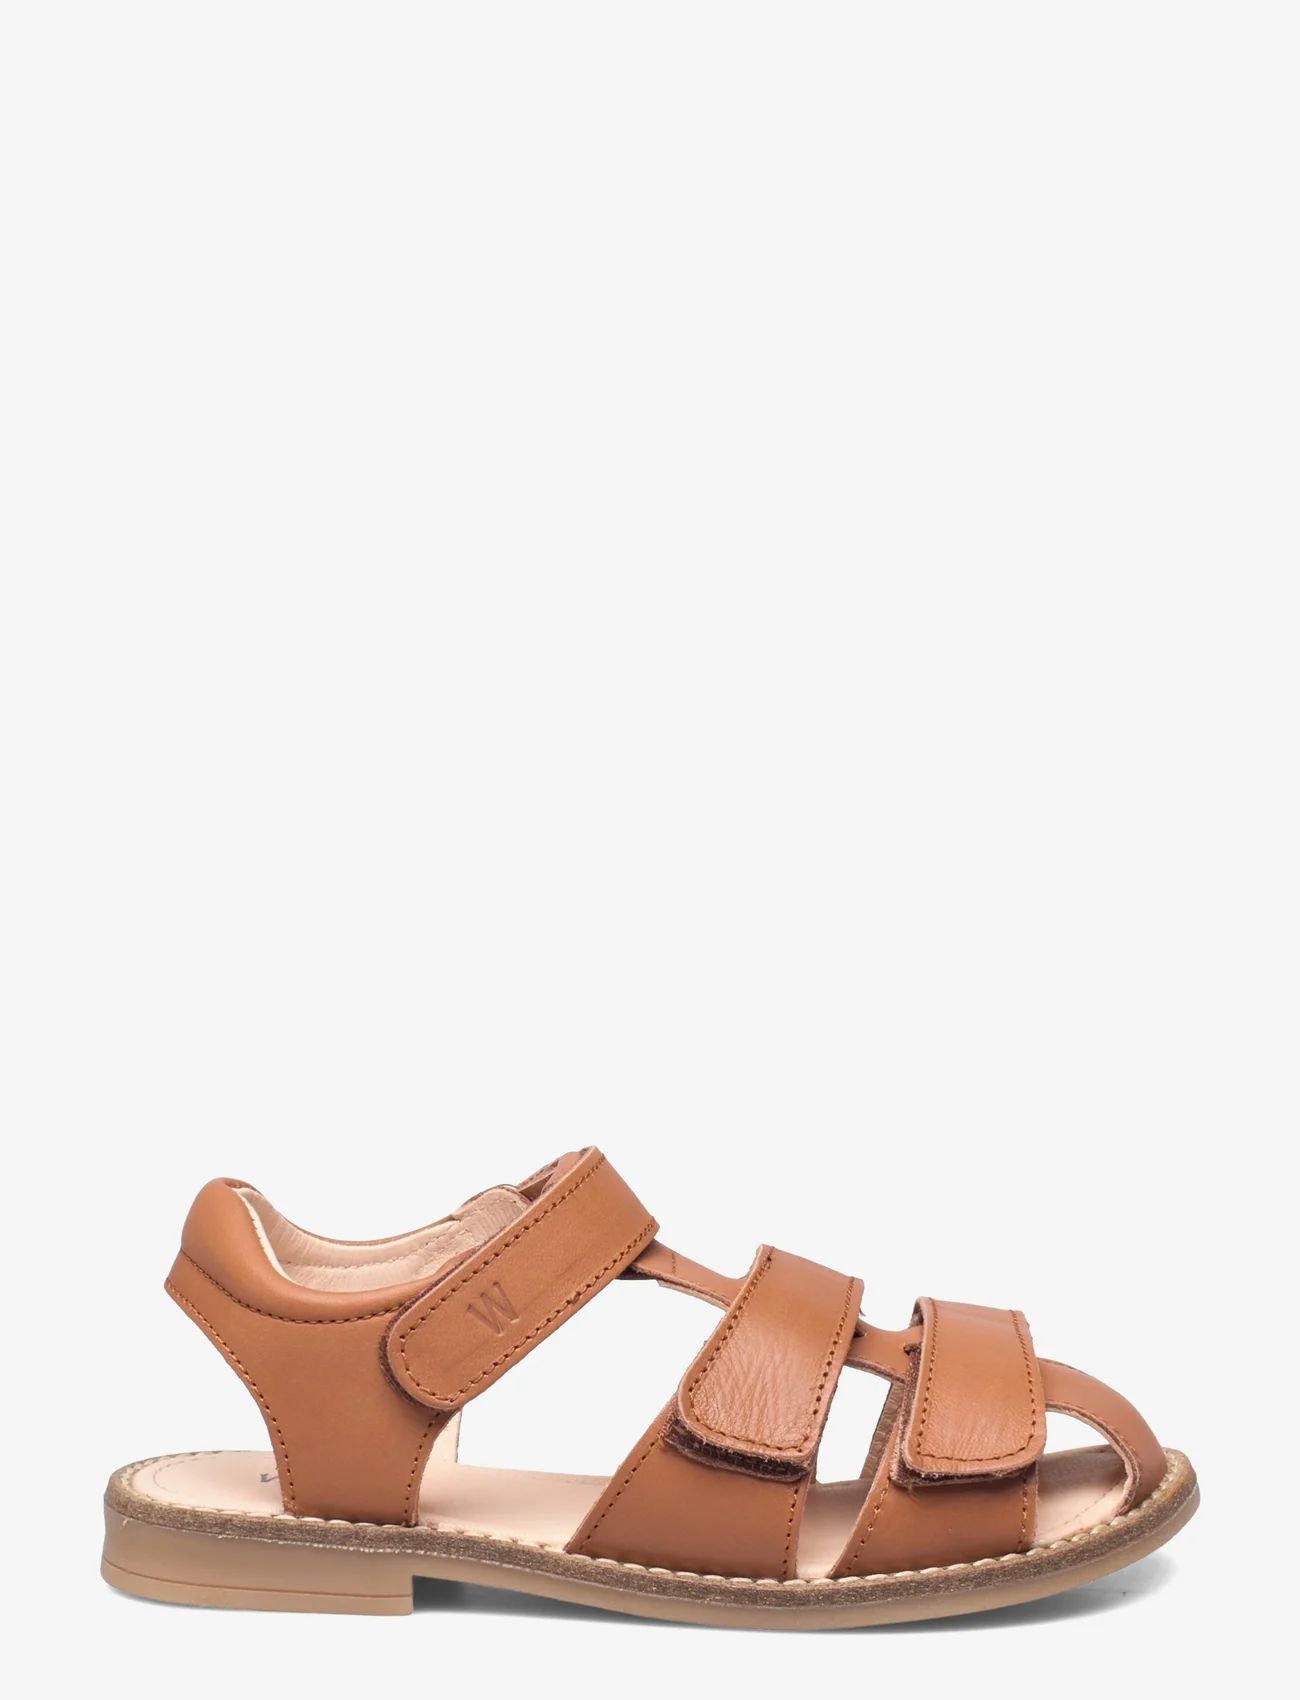 Wheat - Addison leather sandal - sommarfynd - amber brown - 1